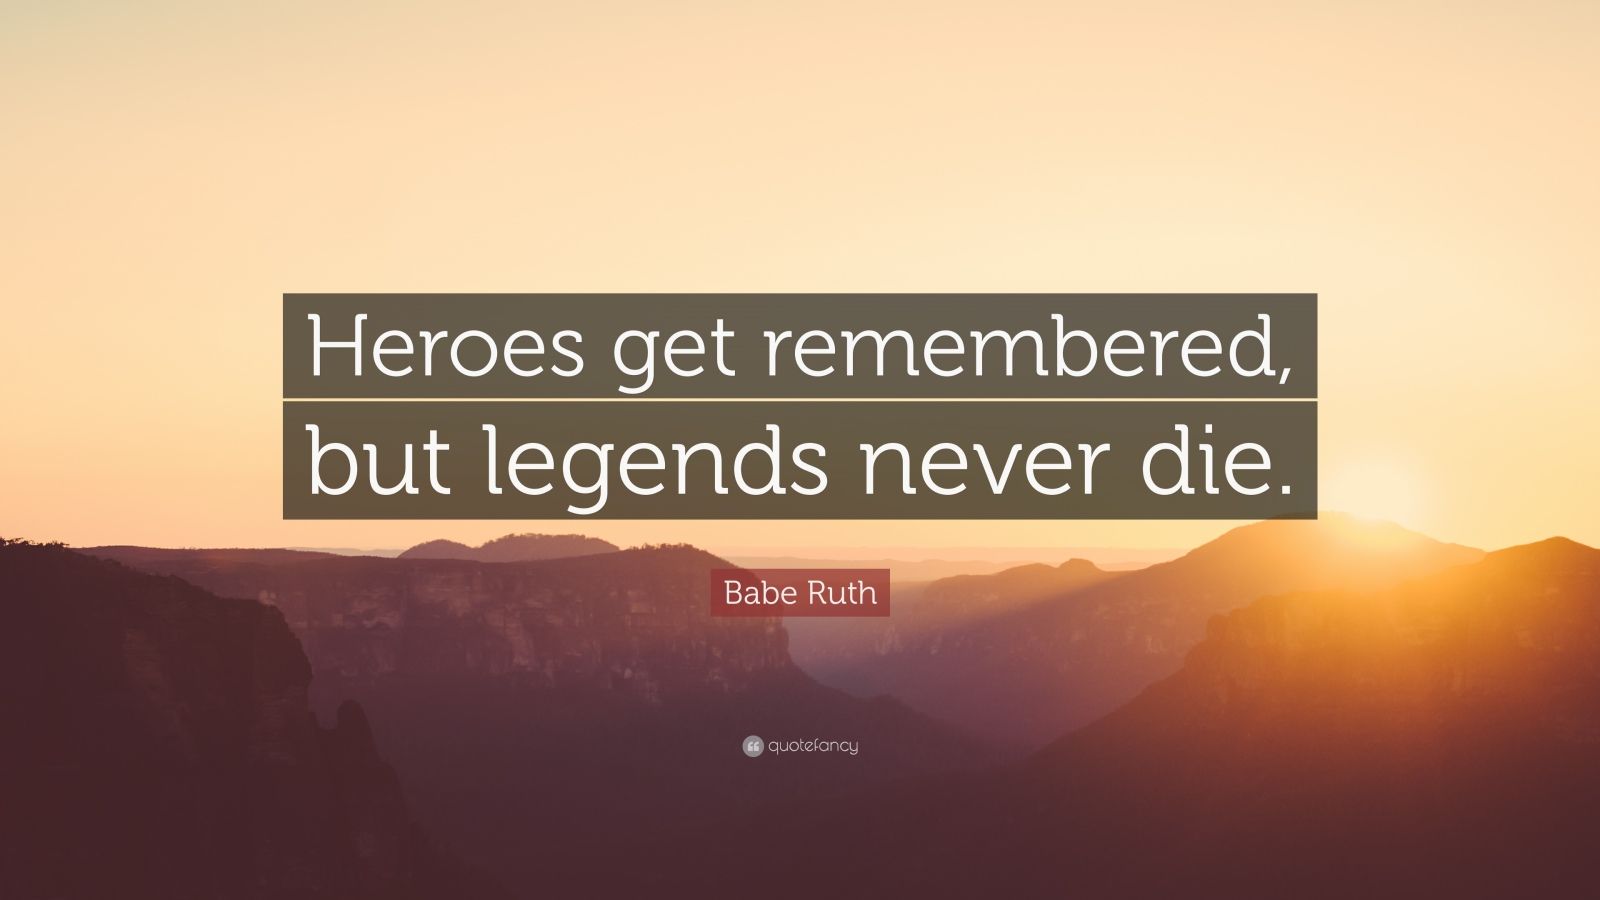 Babe Ruth Quote: "Heroes get remembered, but legends never die." (21 wallpapers) - Quotefancy